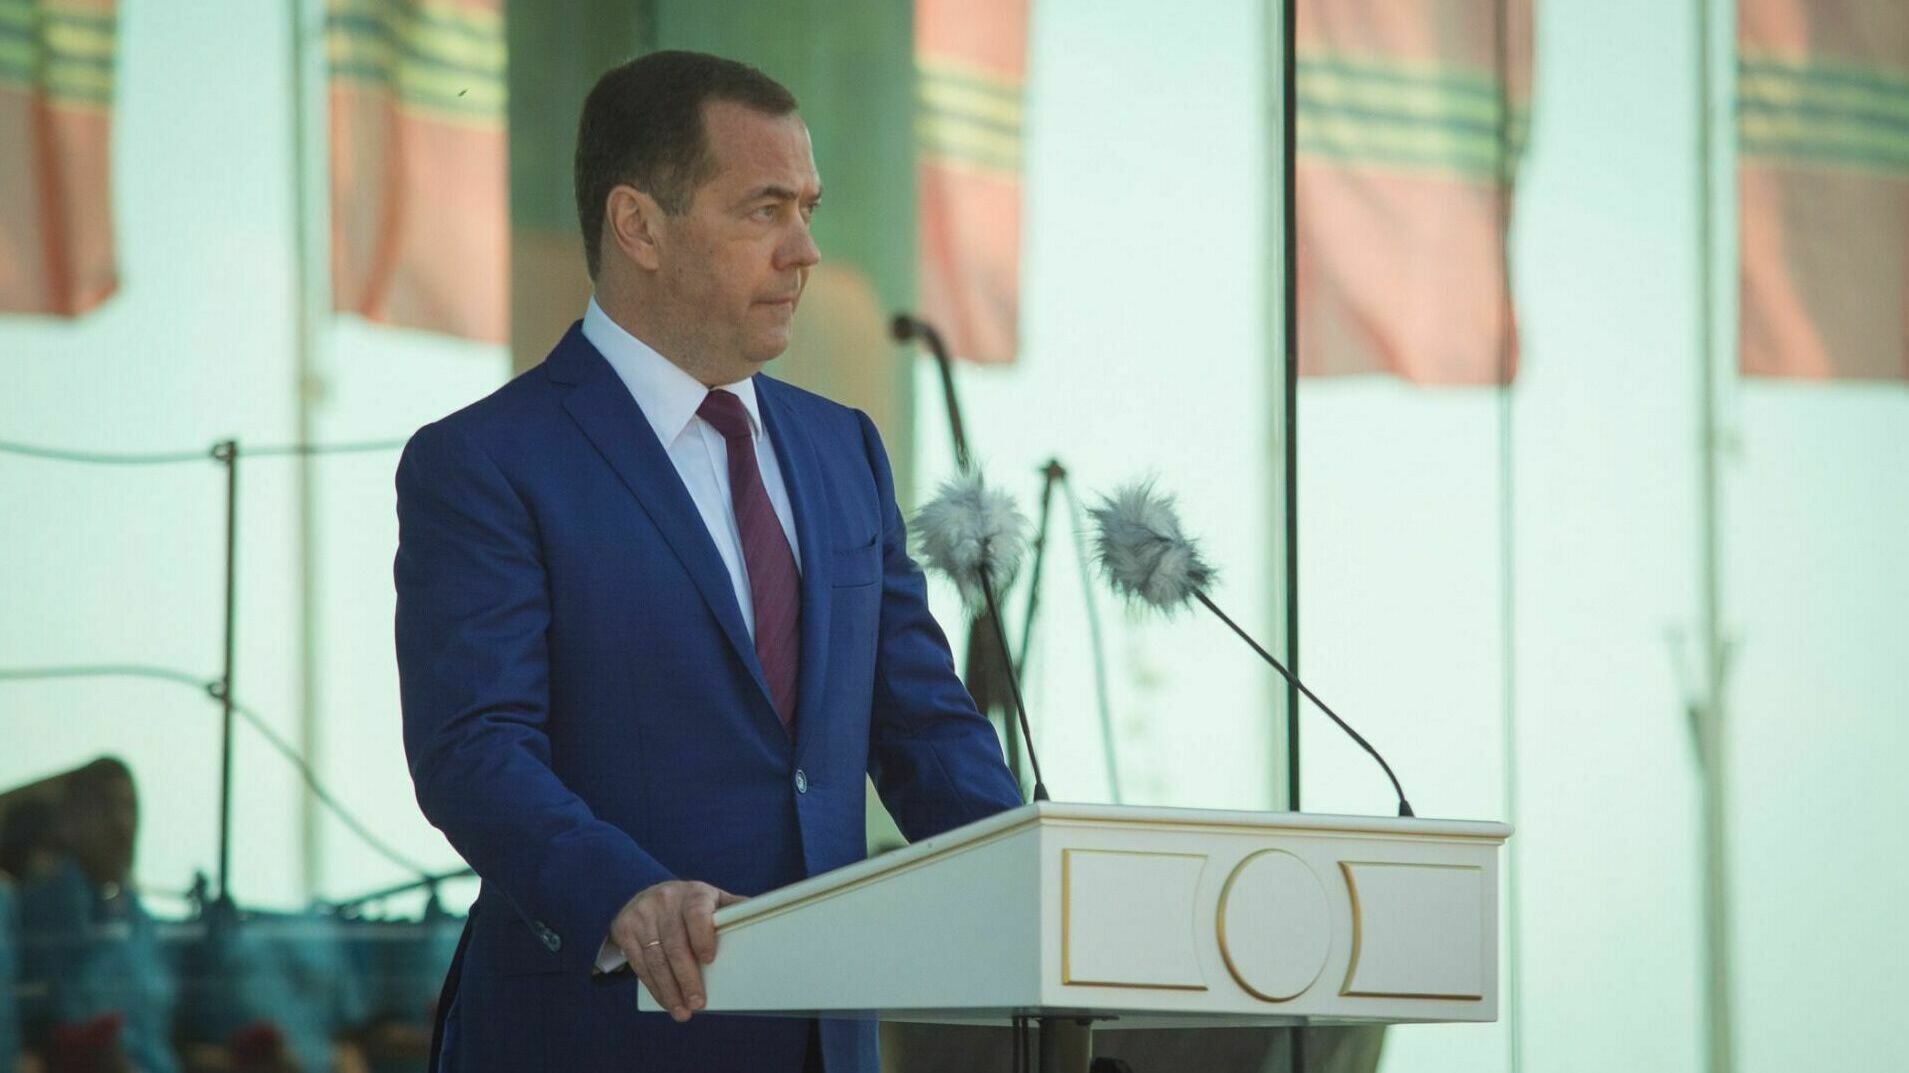 Dmitry Medvedev urged not to let "traitors" into Russia and deprive them of income in the country